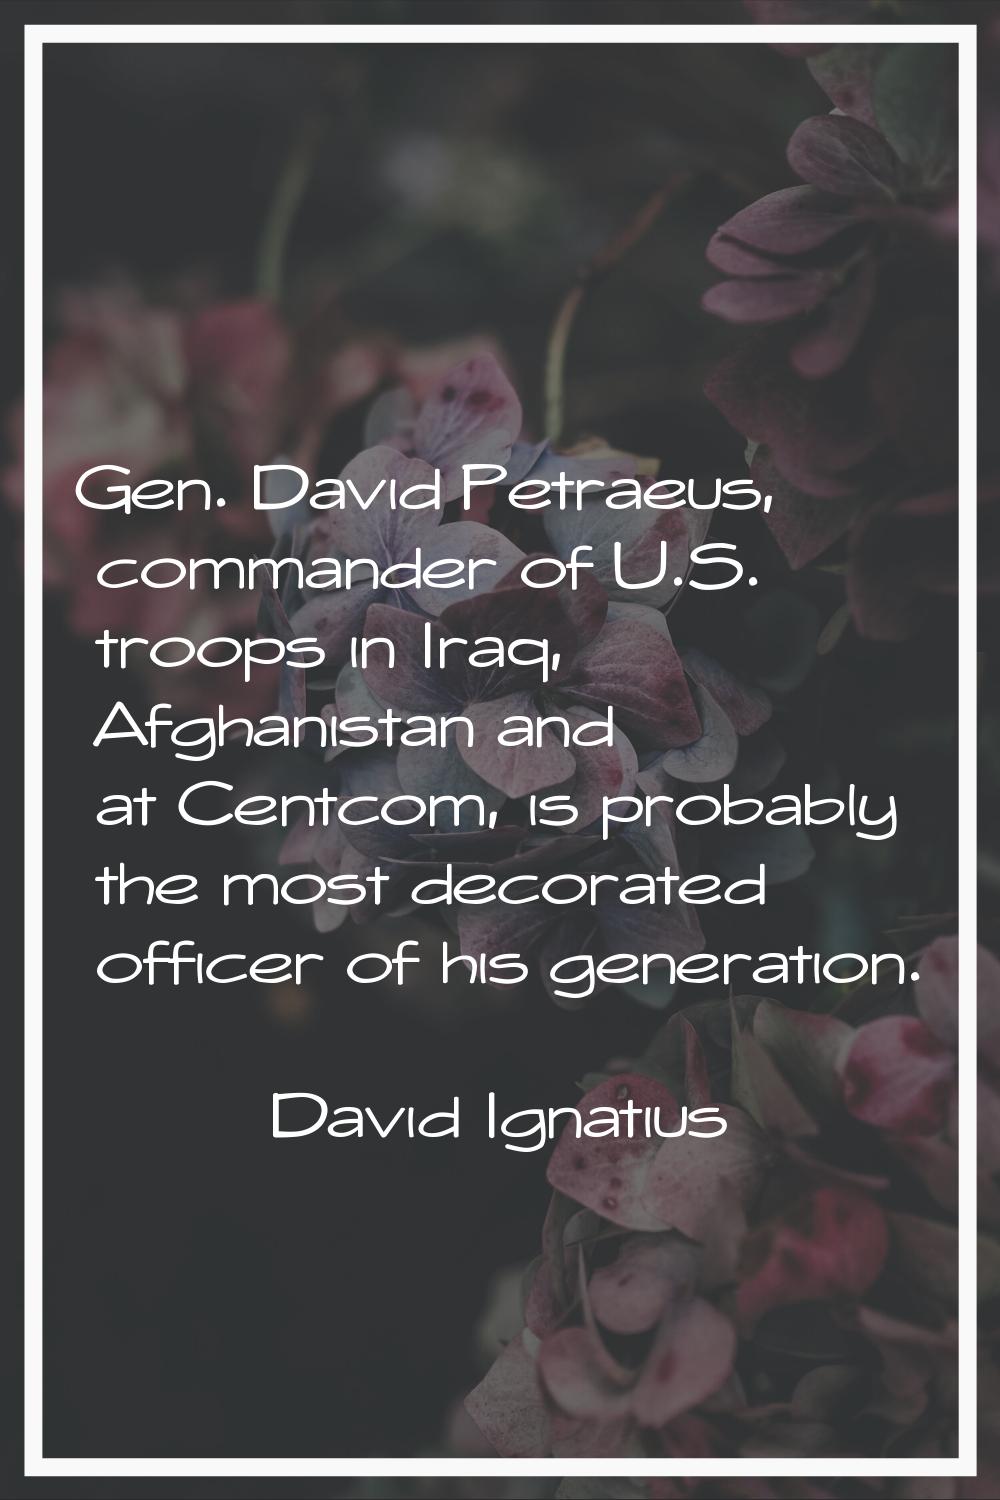 Gen. David Petraeus, commander of U.S. troops in Iraq, Afghanistan and at Centcom, is probably the 